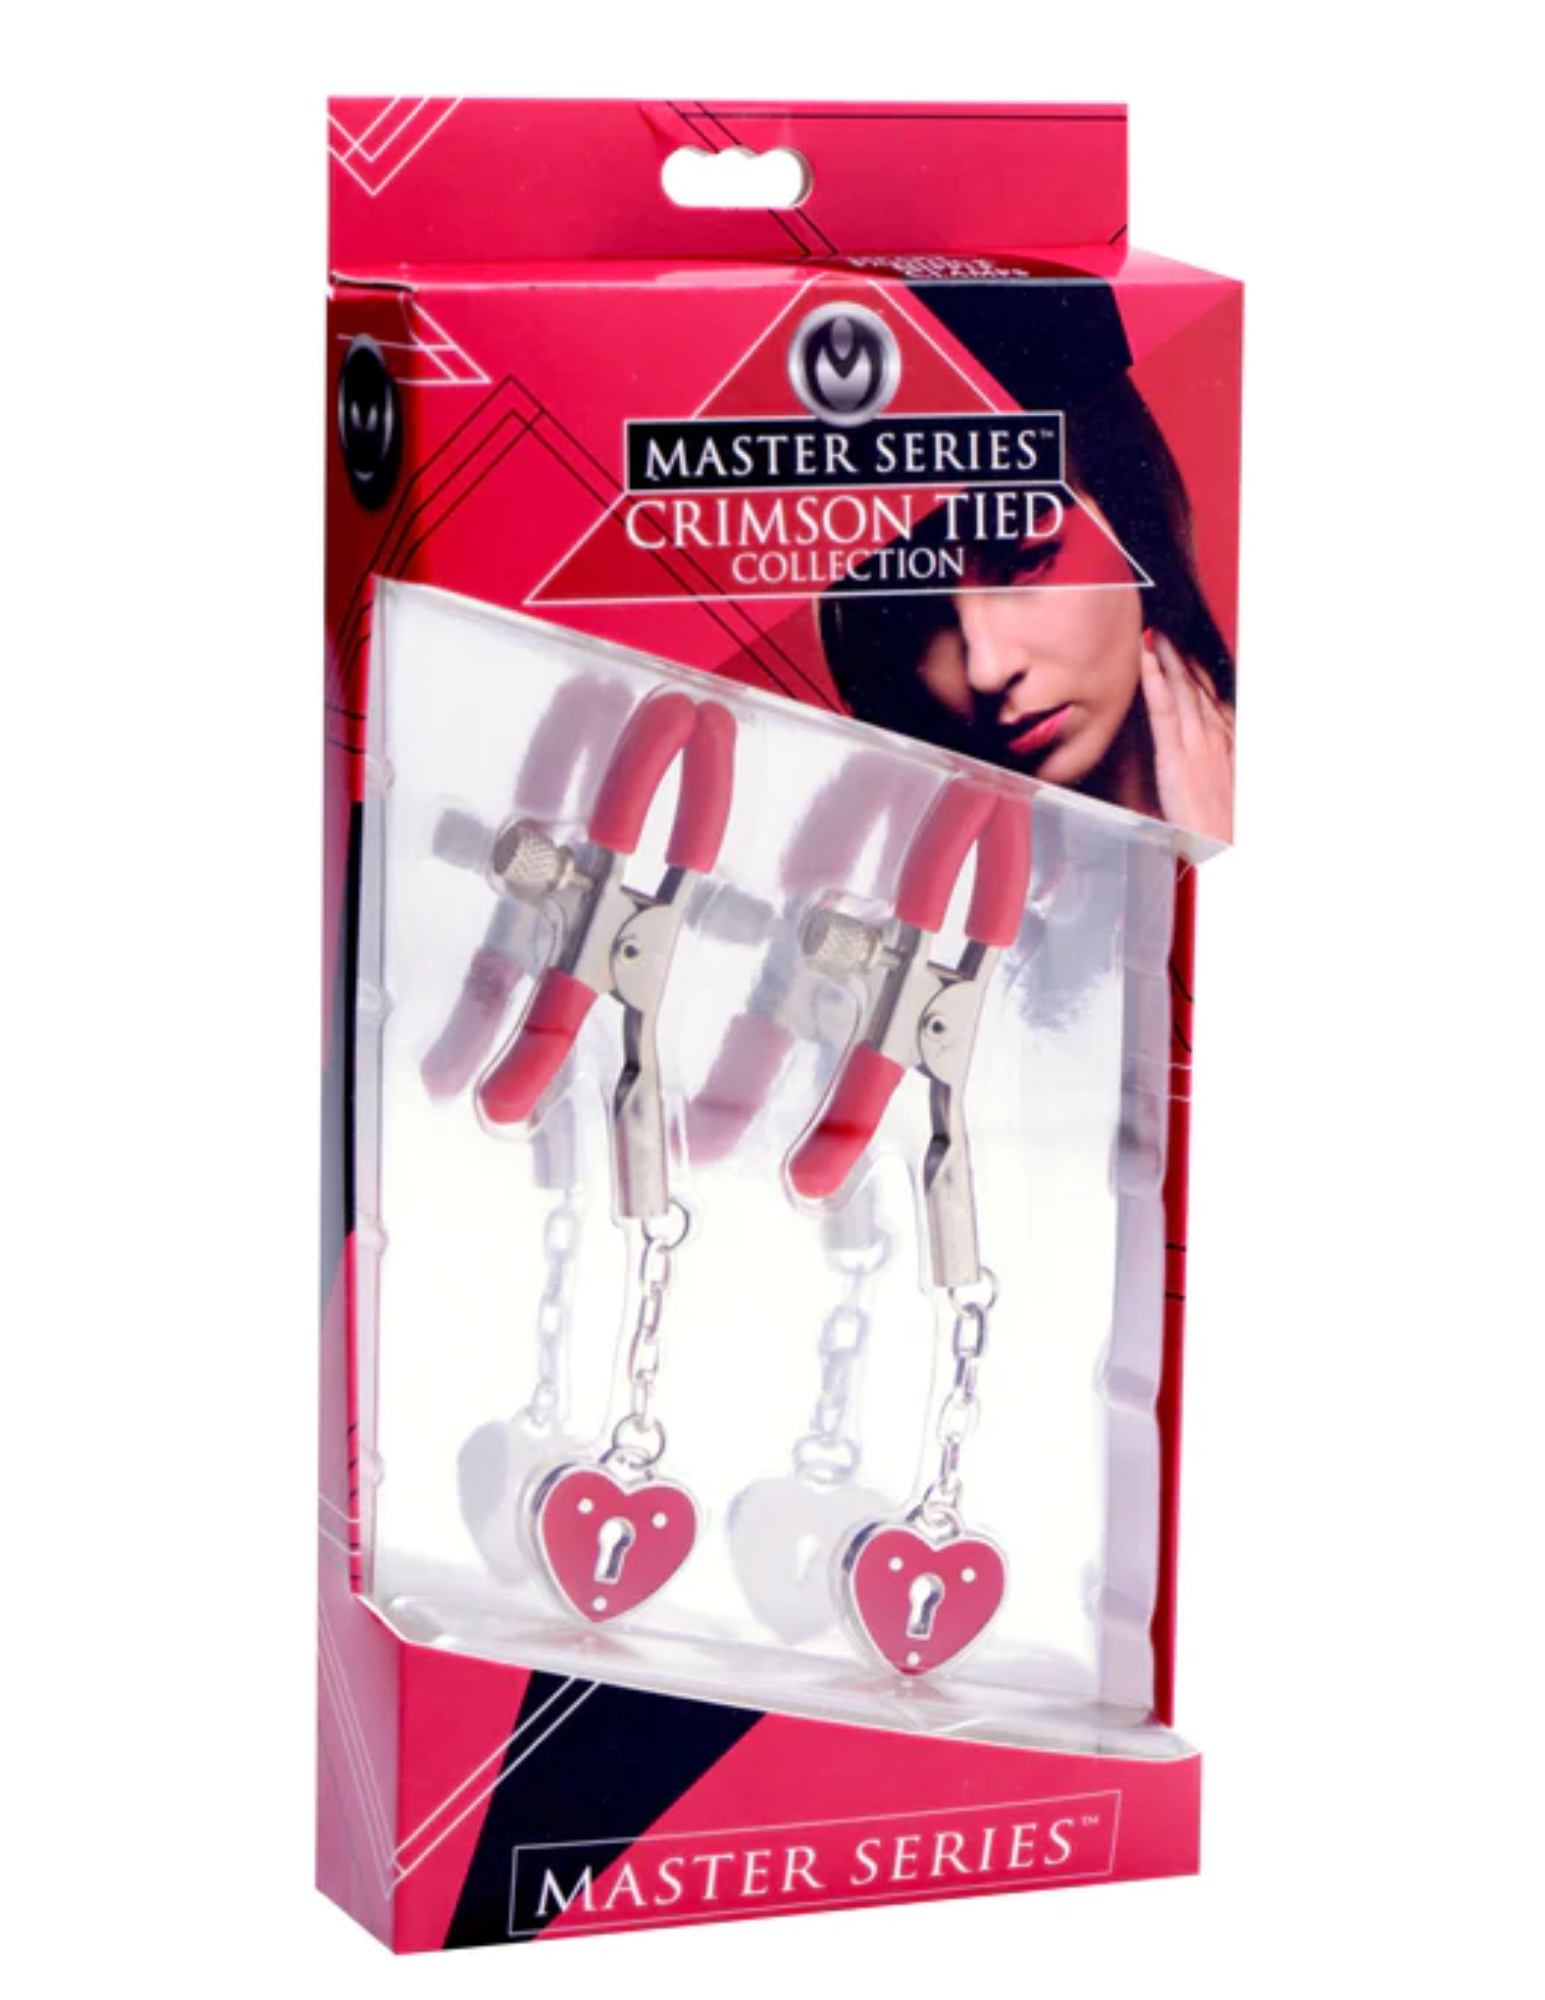 Master Series Crimson Tied Collection Captive Heart Padlock Nipple Clamps (red) in package.